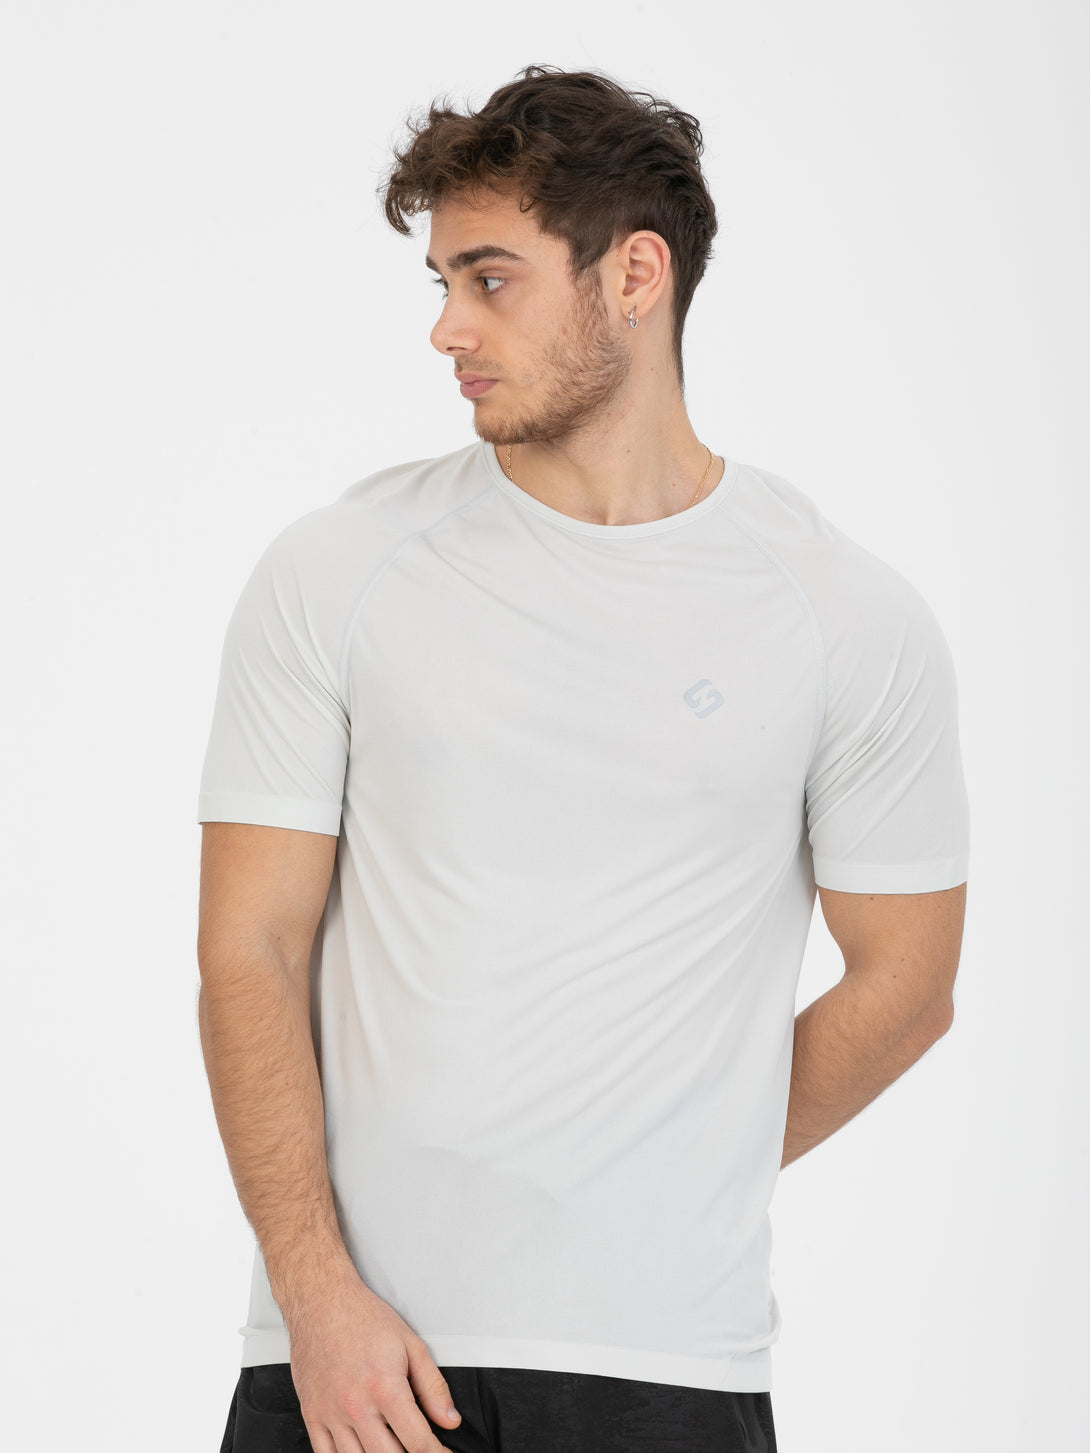 A Man Wearing Light Grey Color Seamless The Motion T-Shirt